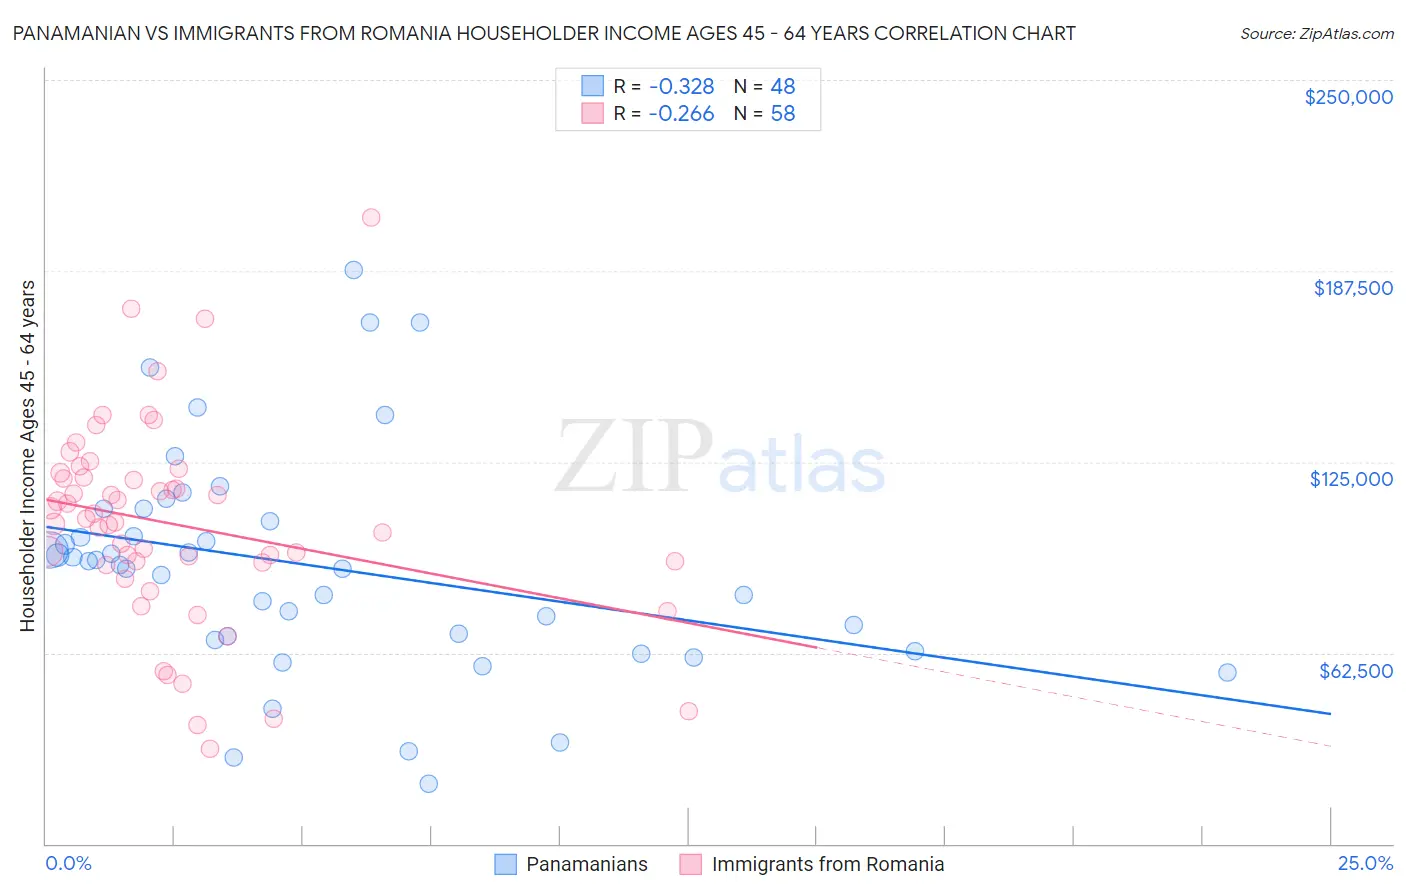 Panamanian vs Immigrants from Romania Householder Income Ages 45 - 64 years